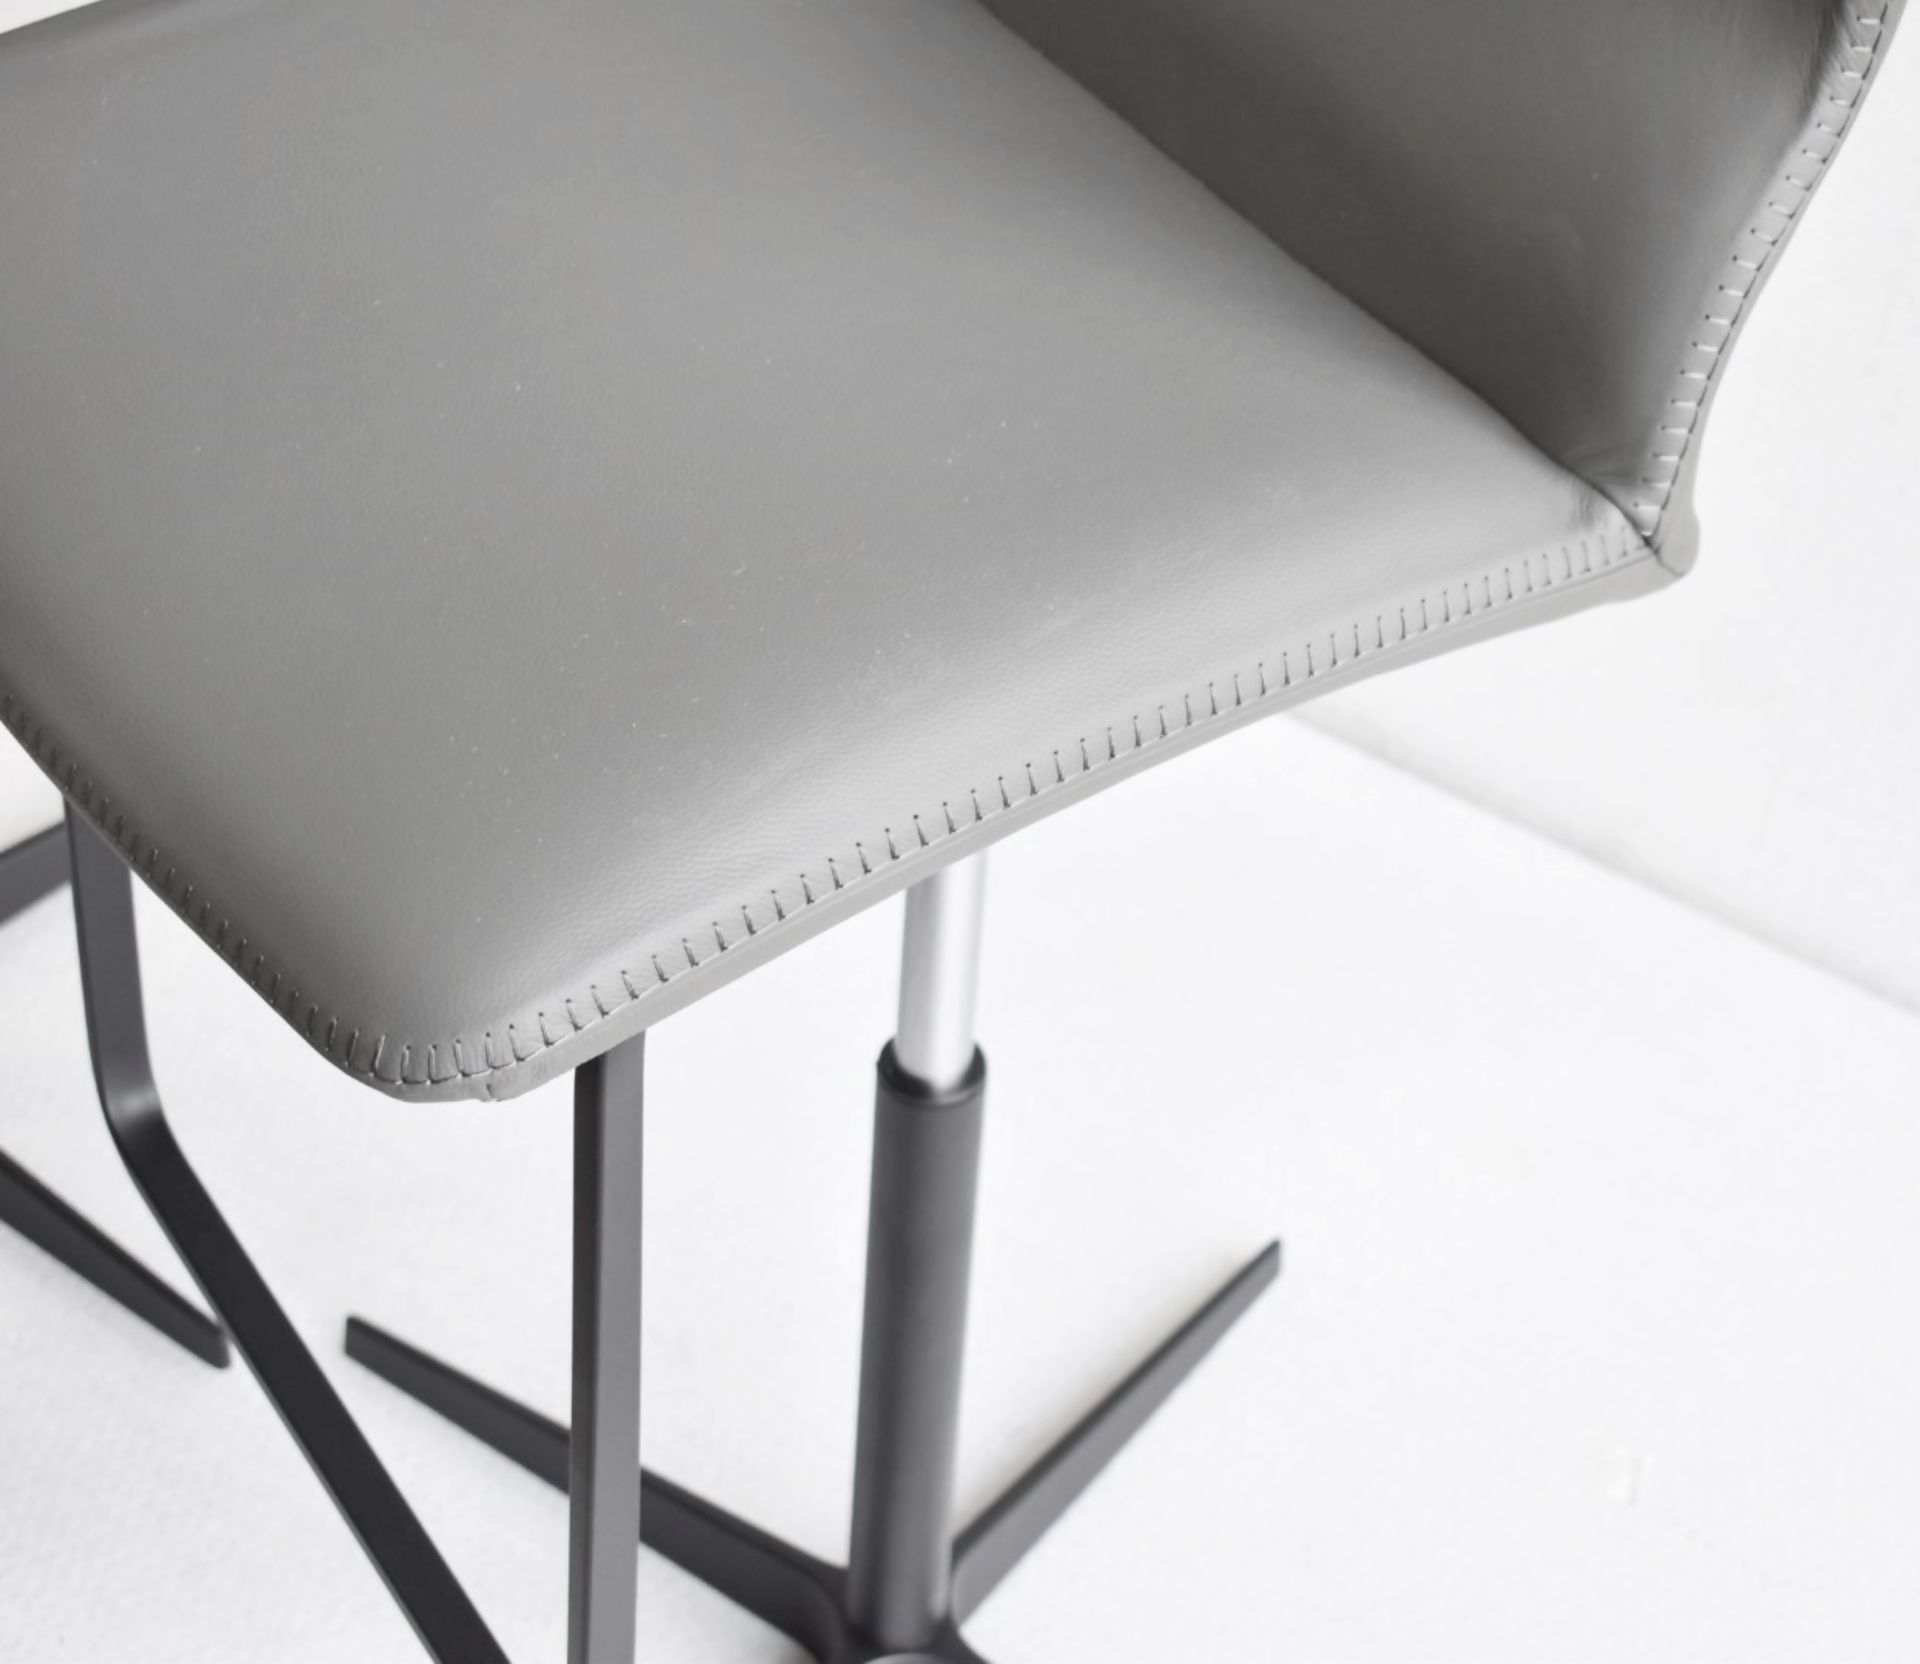 A Pair of CATTELAN ITALIA 'Victor X' Designer Leather Upholstered Barstools - Original Price £1,798 - Image 9 of 12